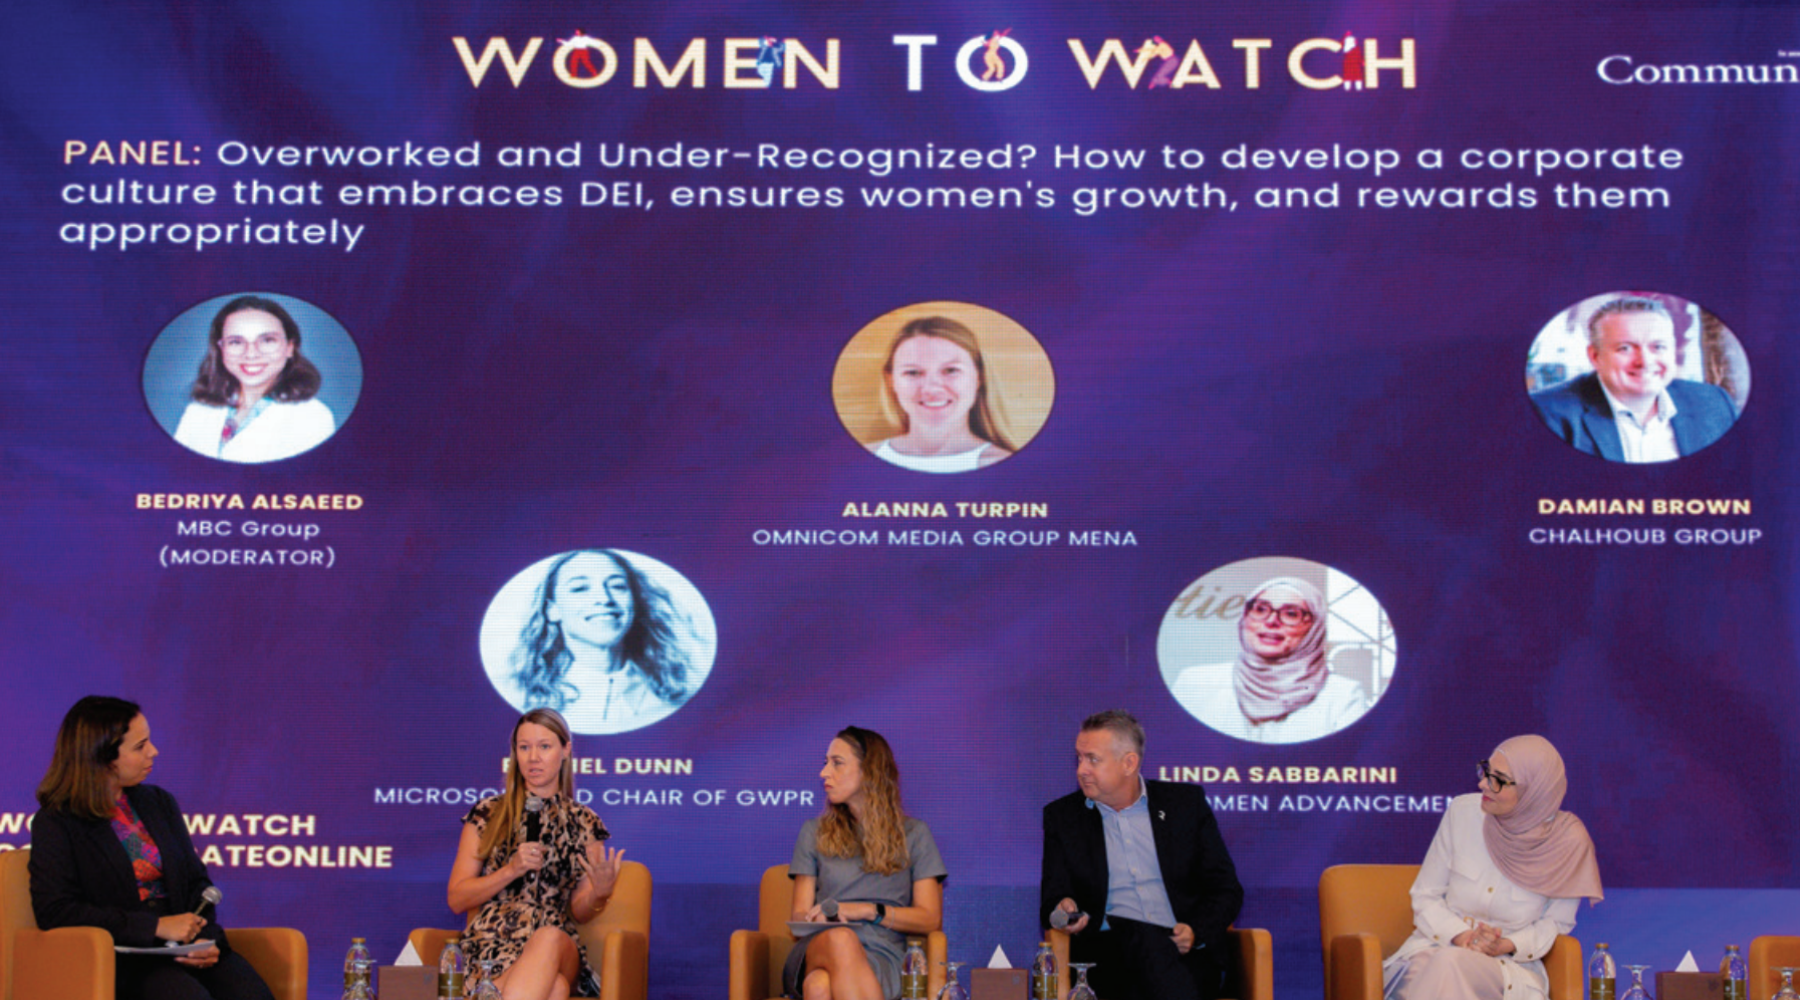 Developing a Corporate Culture that Embraces DEI & Ensures Women’s Growth